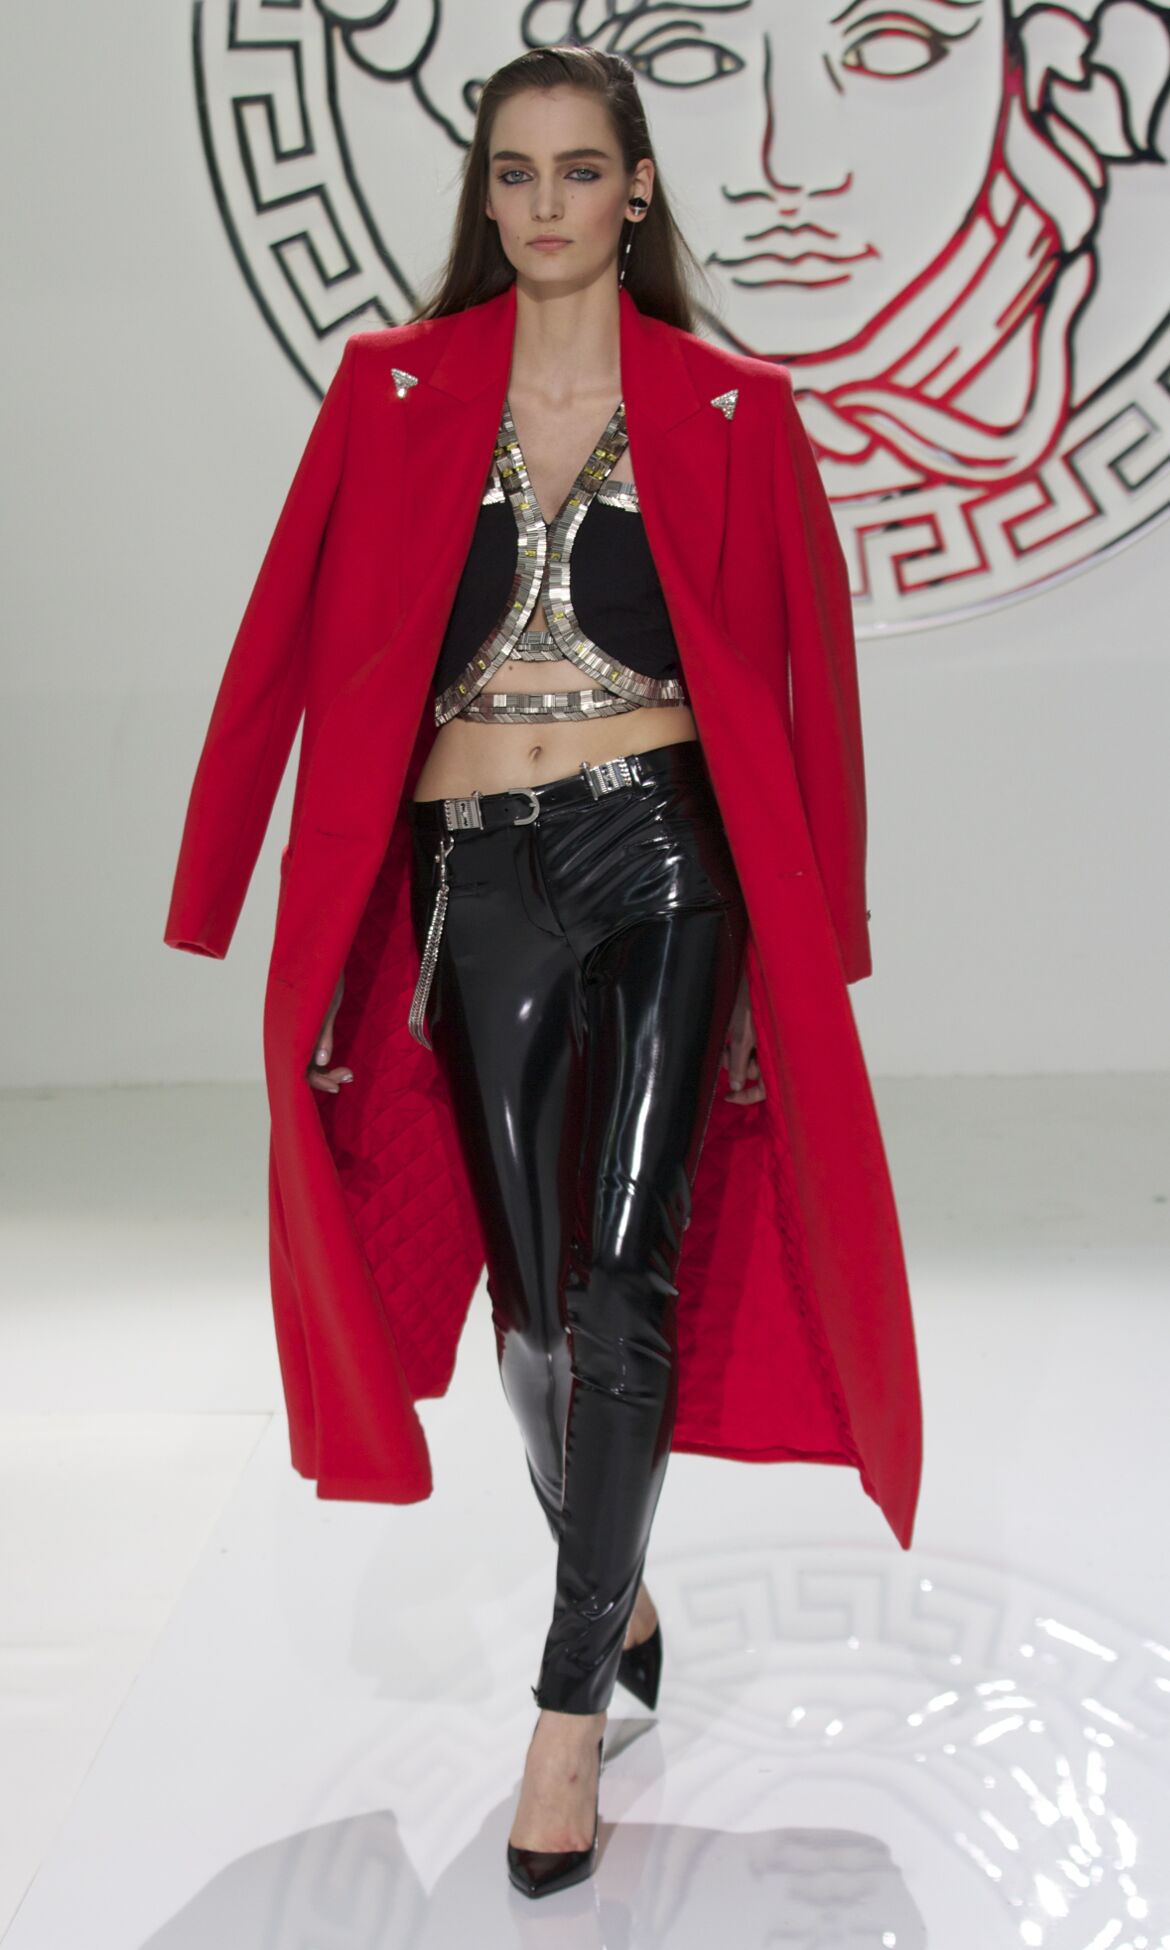 VERSACE FALL WINTER 2013-14 WOMEN'S COLLECTION | The Skinny Beep